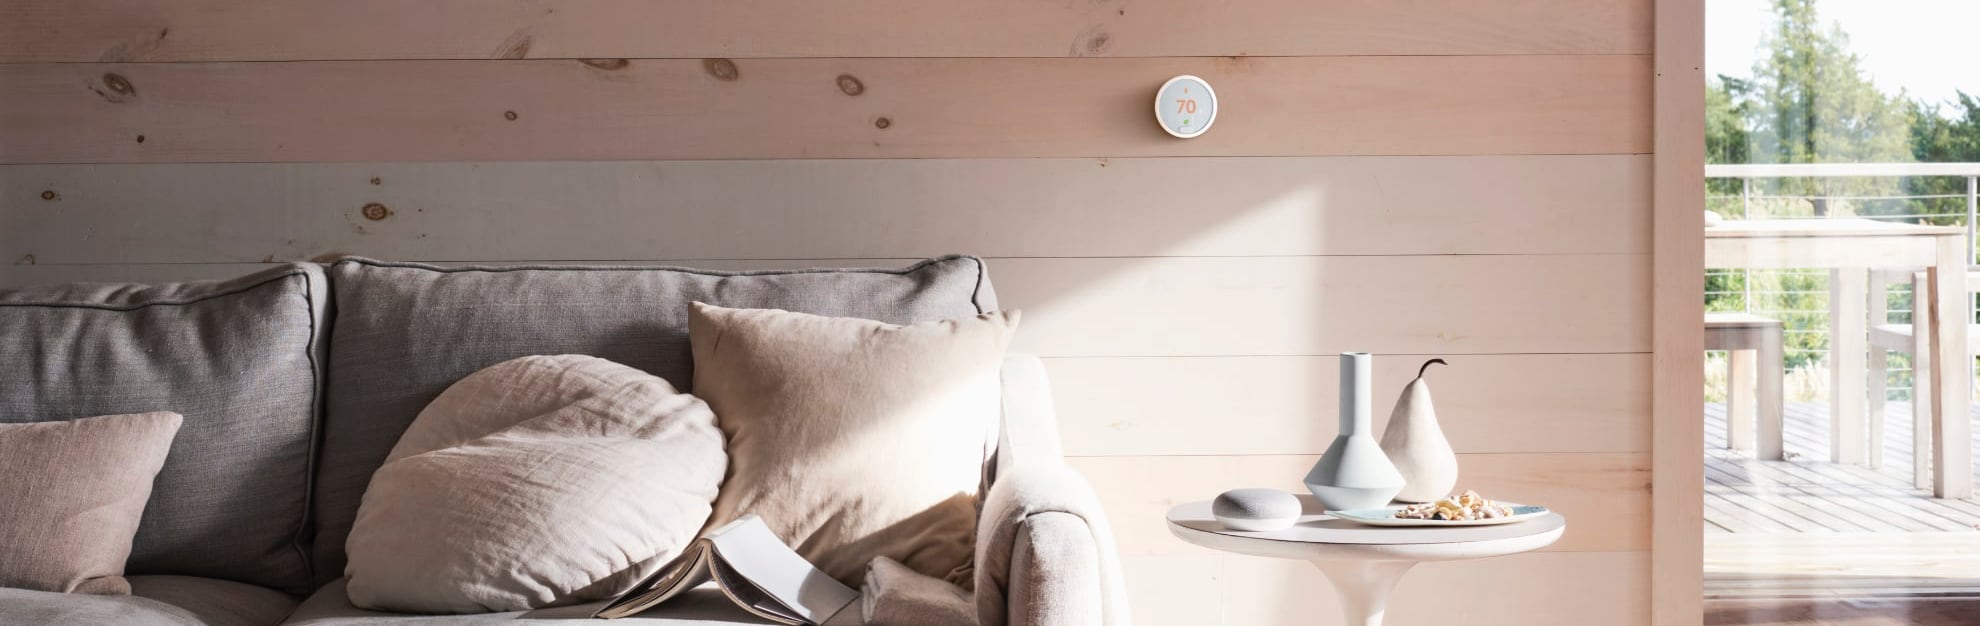 Vivint Home Automation in Oklahoma City